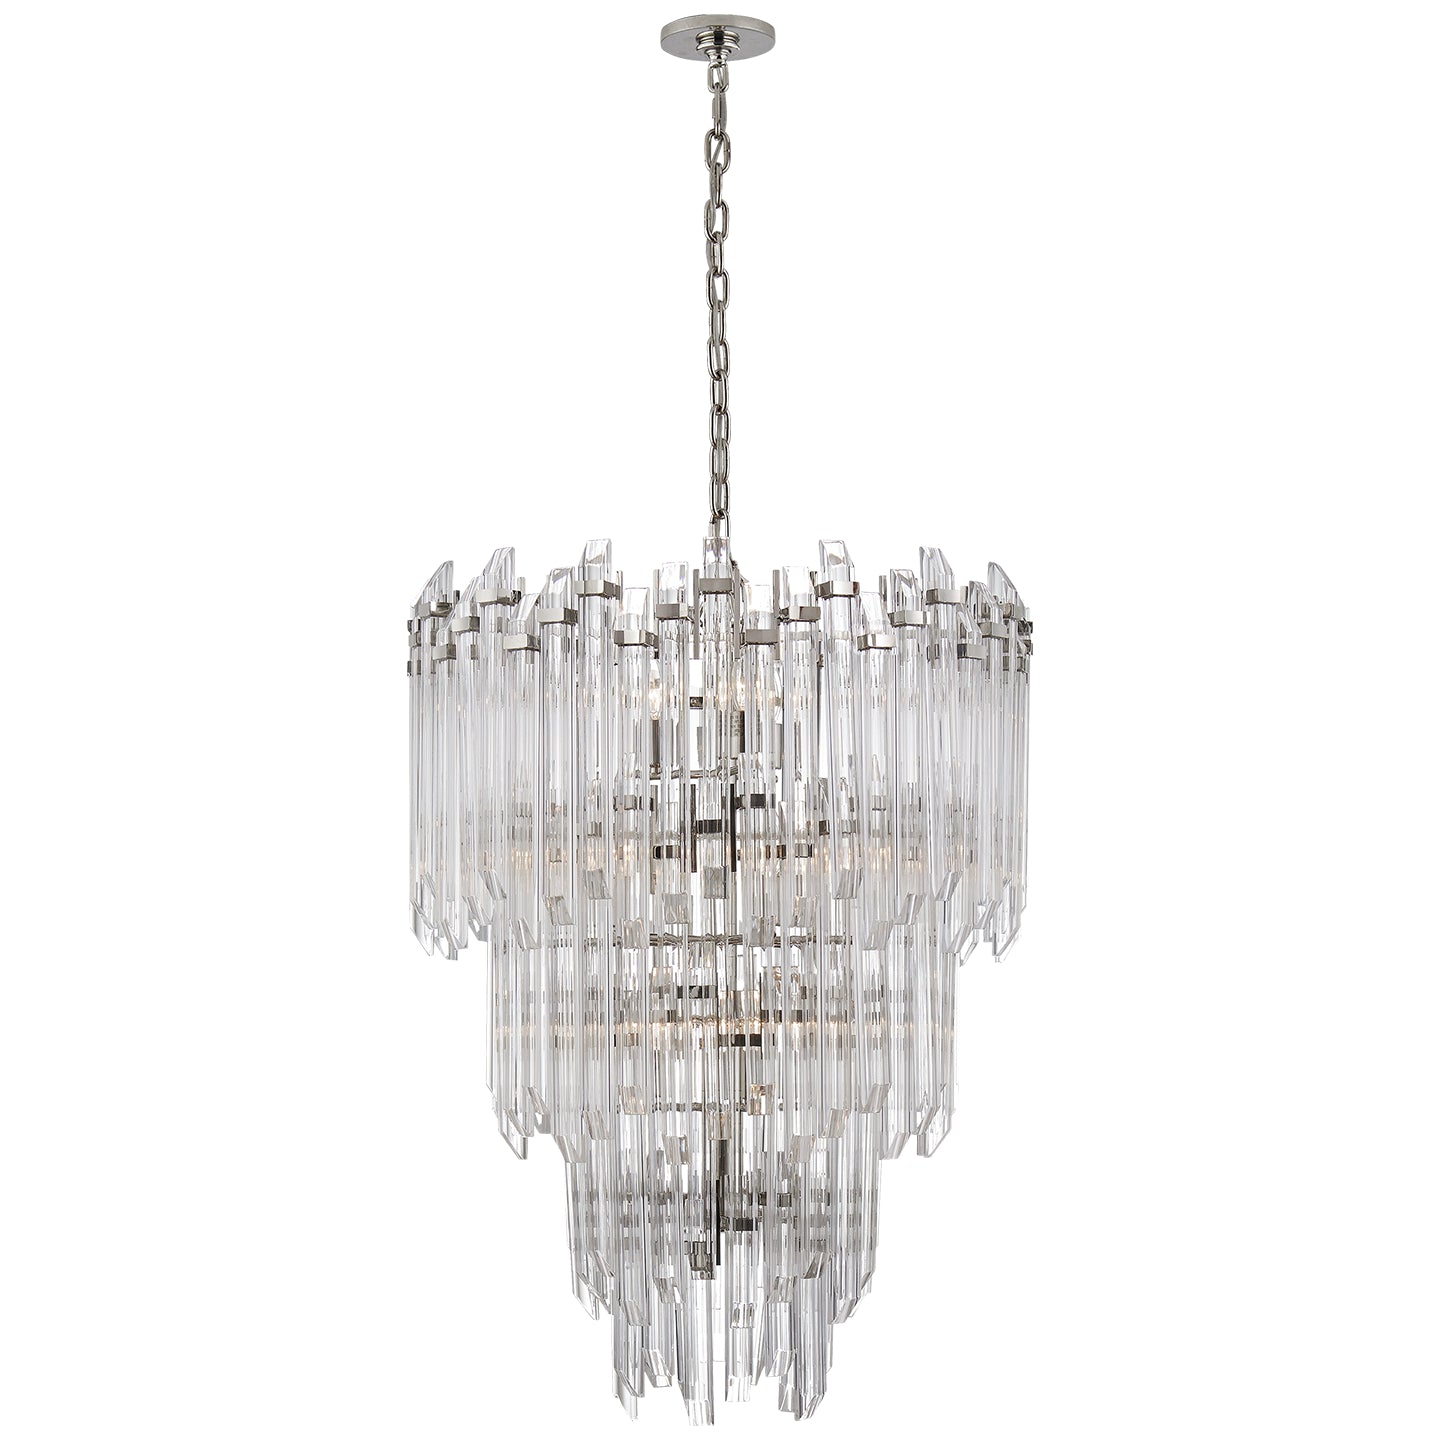 Visual Comfort Signature - SK 5423PN-CA - 12 Light Chandelier - Adele - Polished Nickel with Clear Acrylic